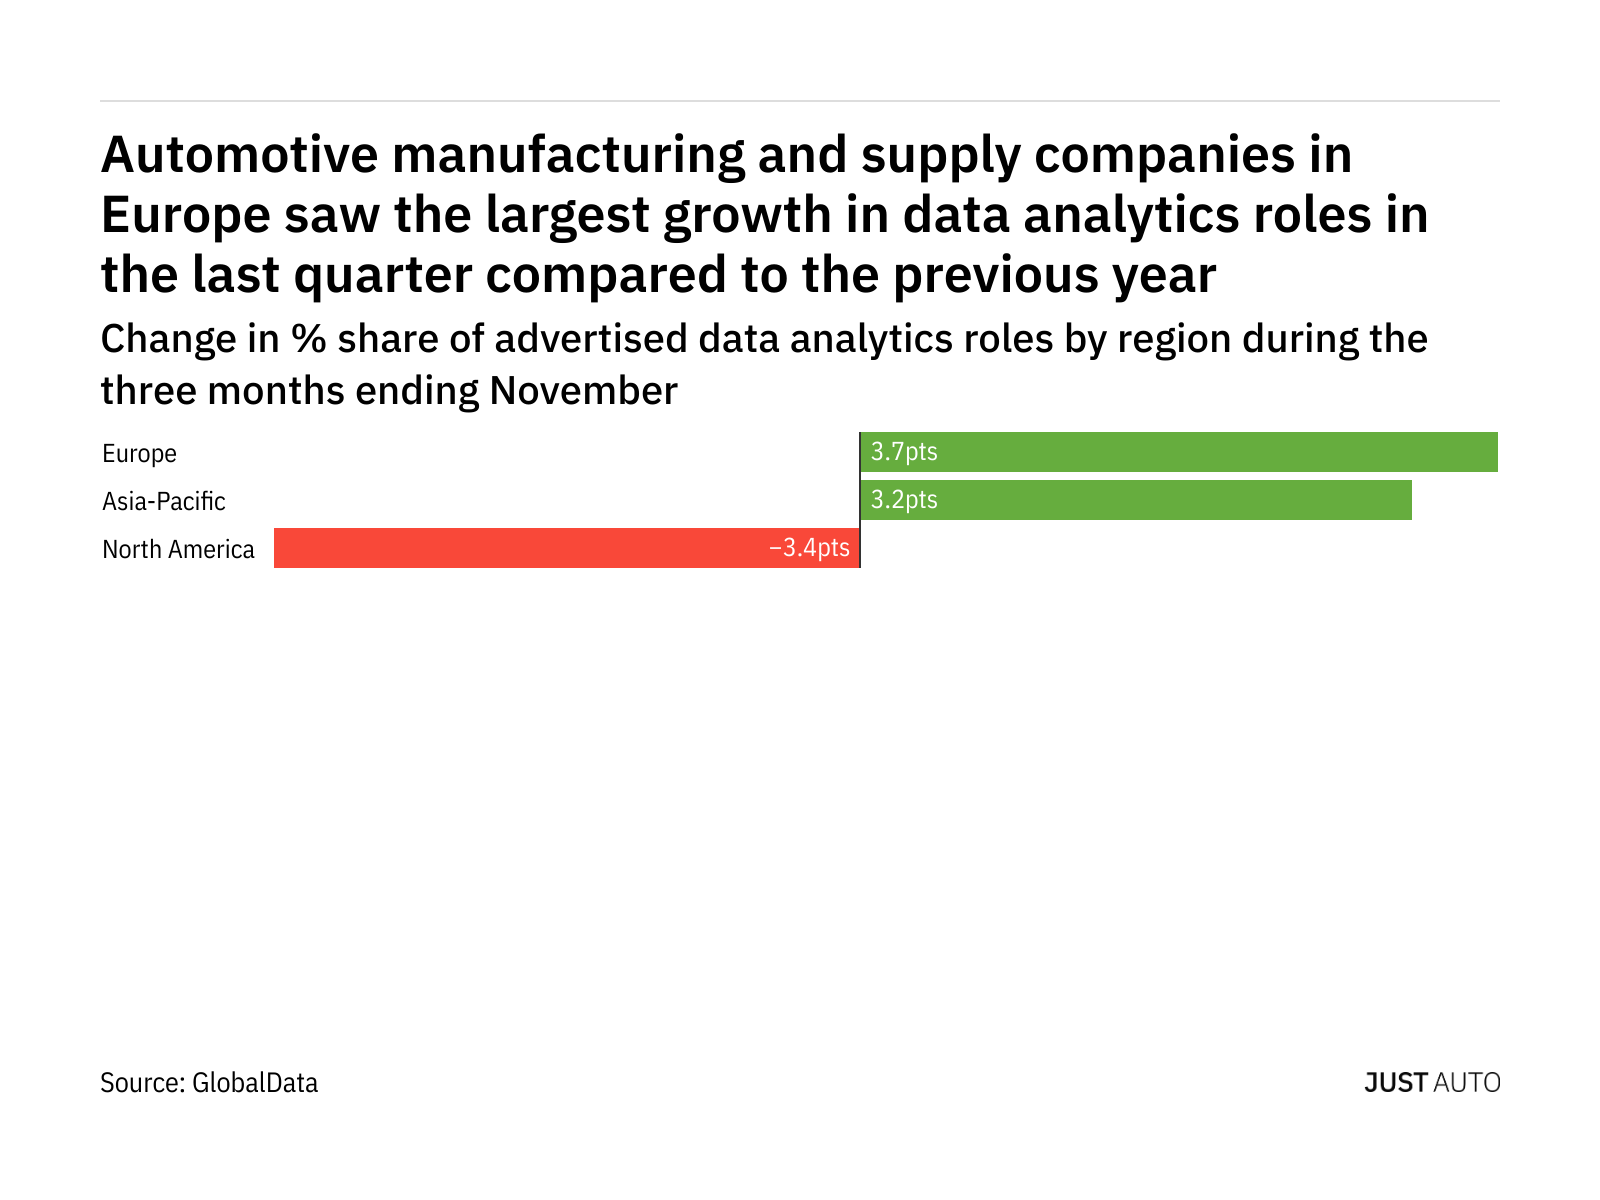 Europe is seeing a hiring boom in automotive industry data analytics roles  - Just Auto